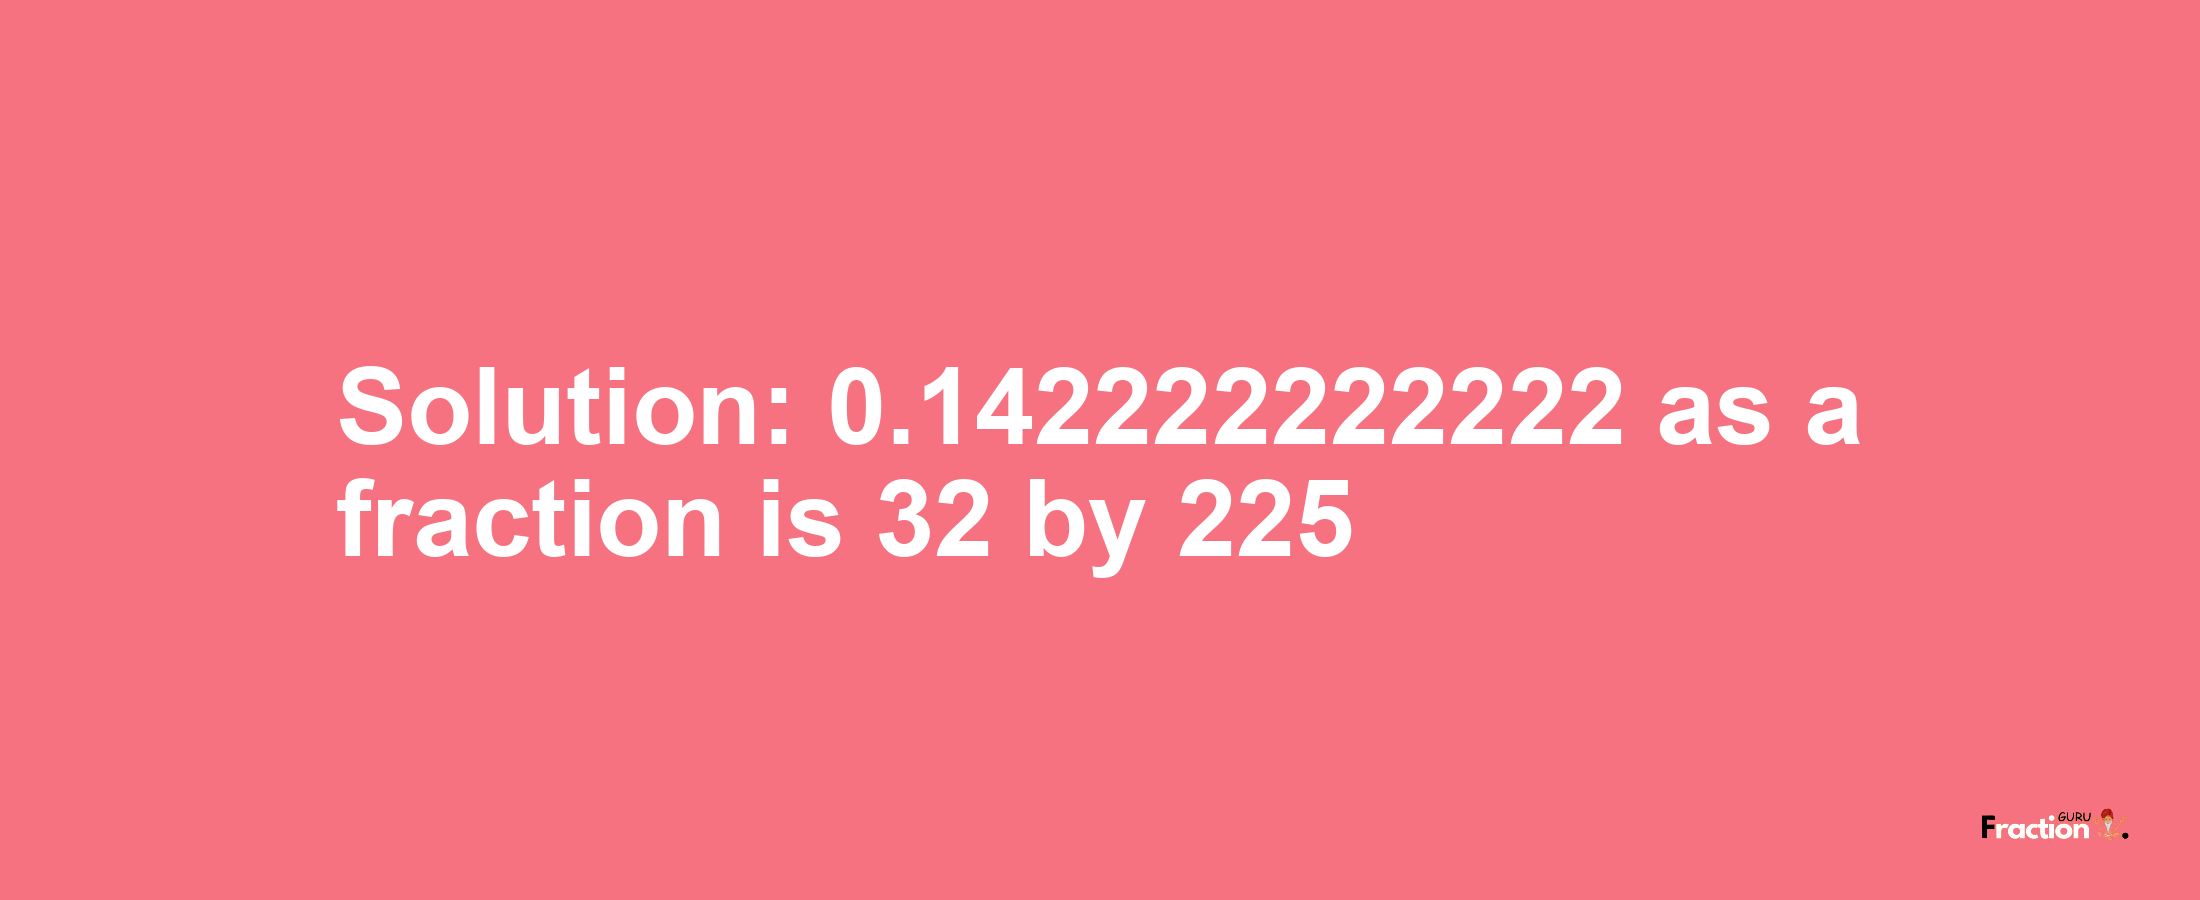 Solution:0.142222222222 as a fraction is 32/225